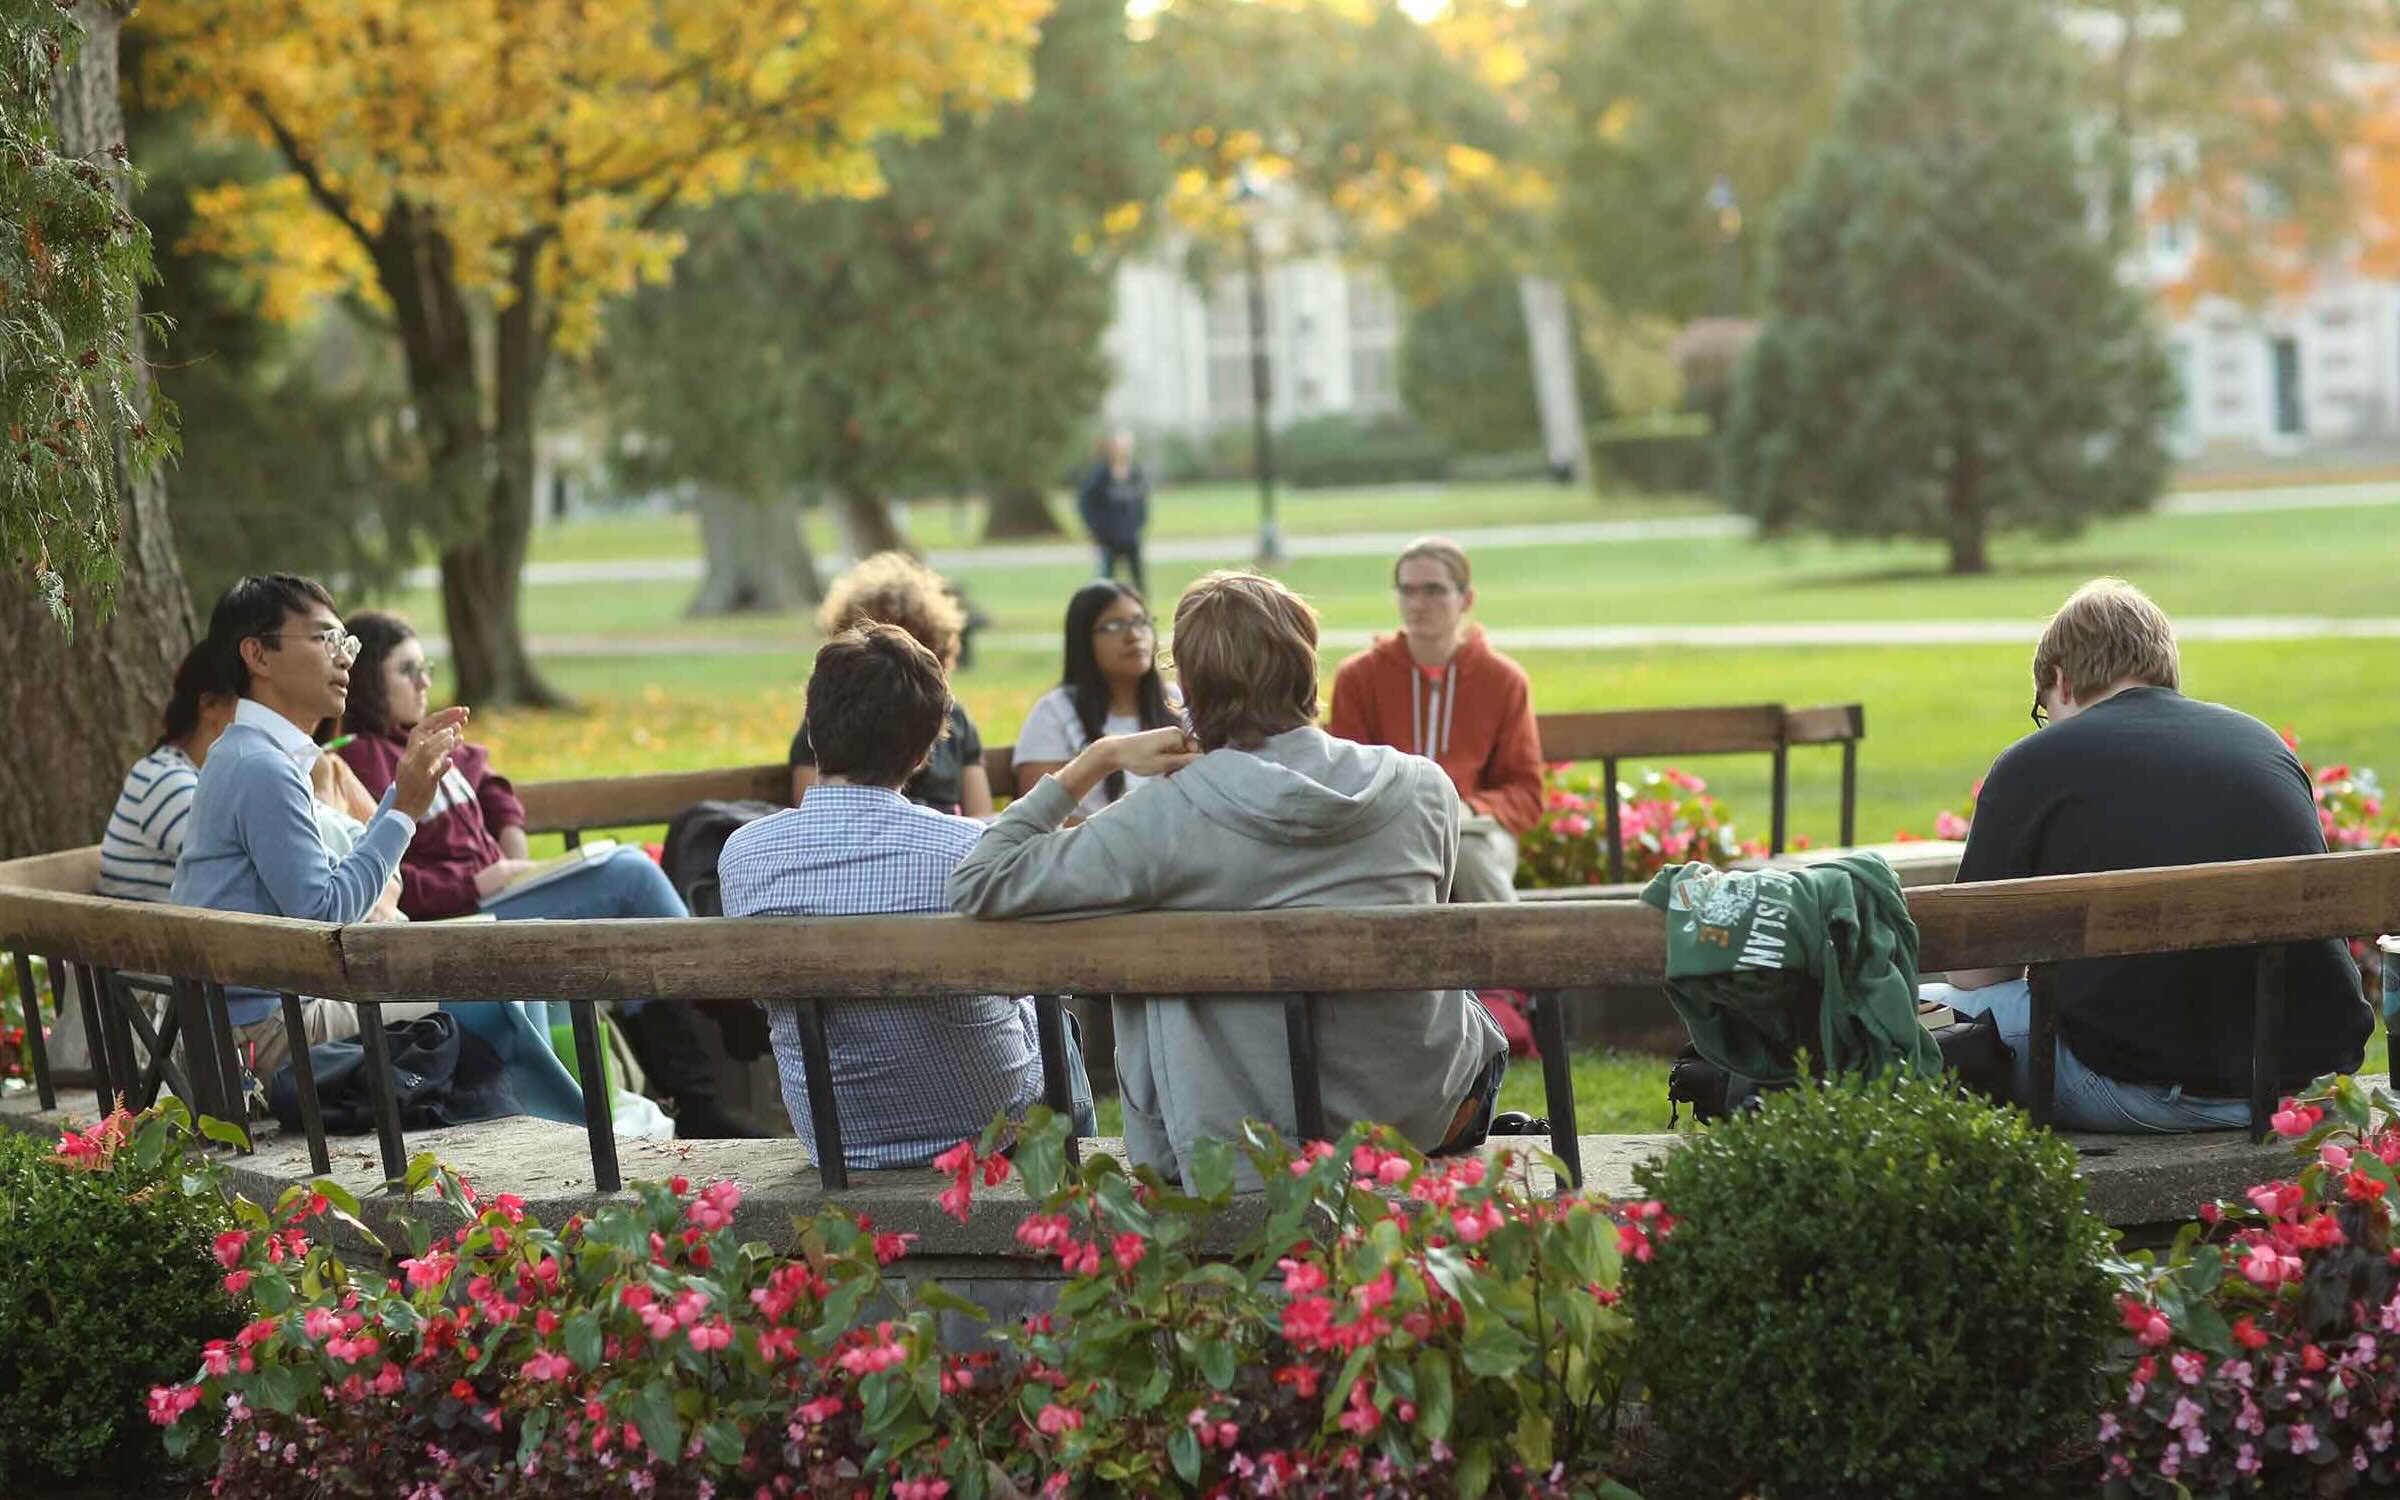 A group in an outdoor classroom seated in a circle.